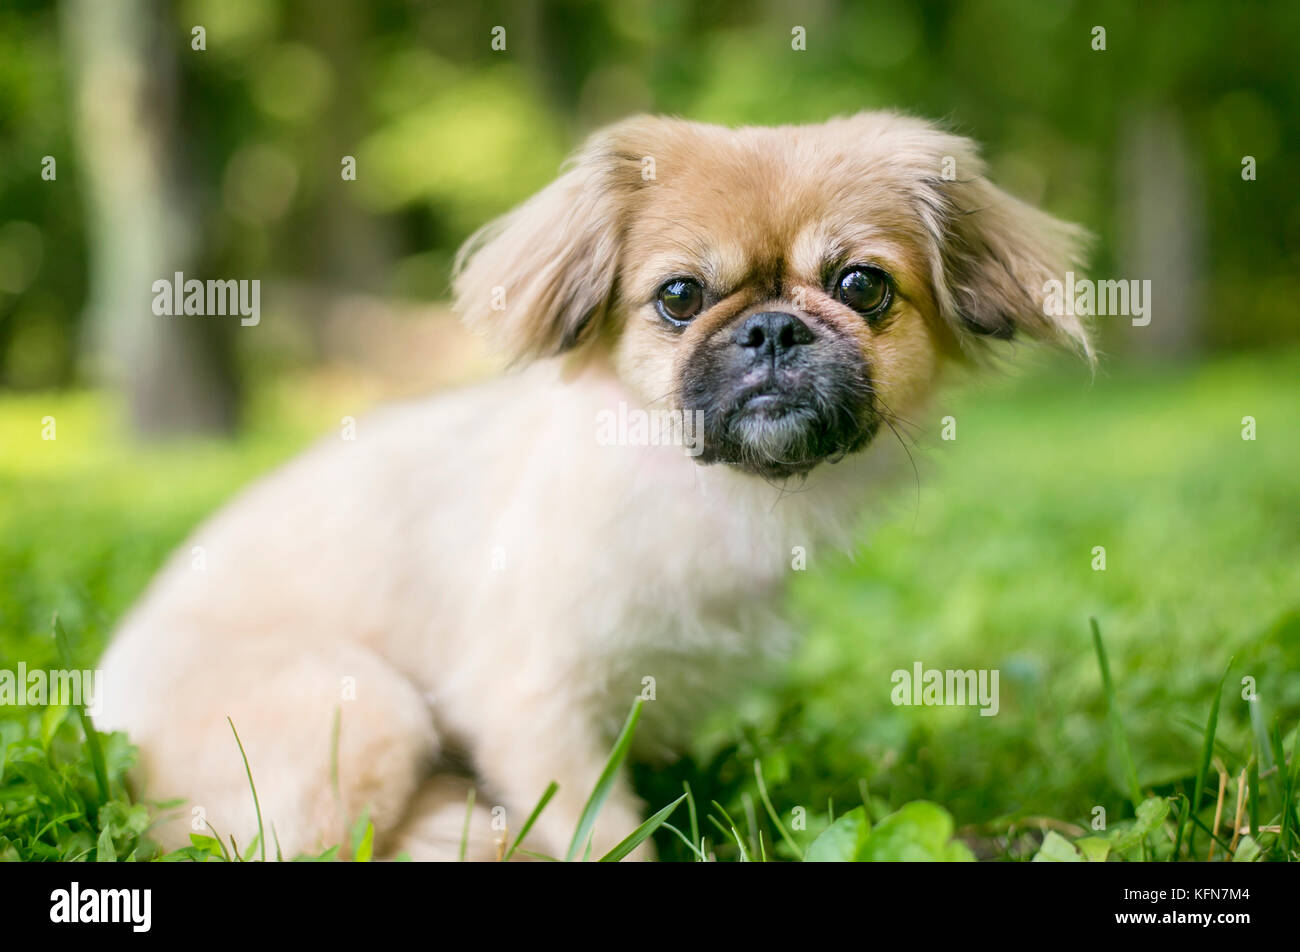 A cute Pekingese mixed breed puppy in the grass Stock Photo